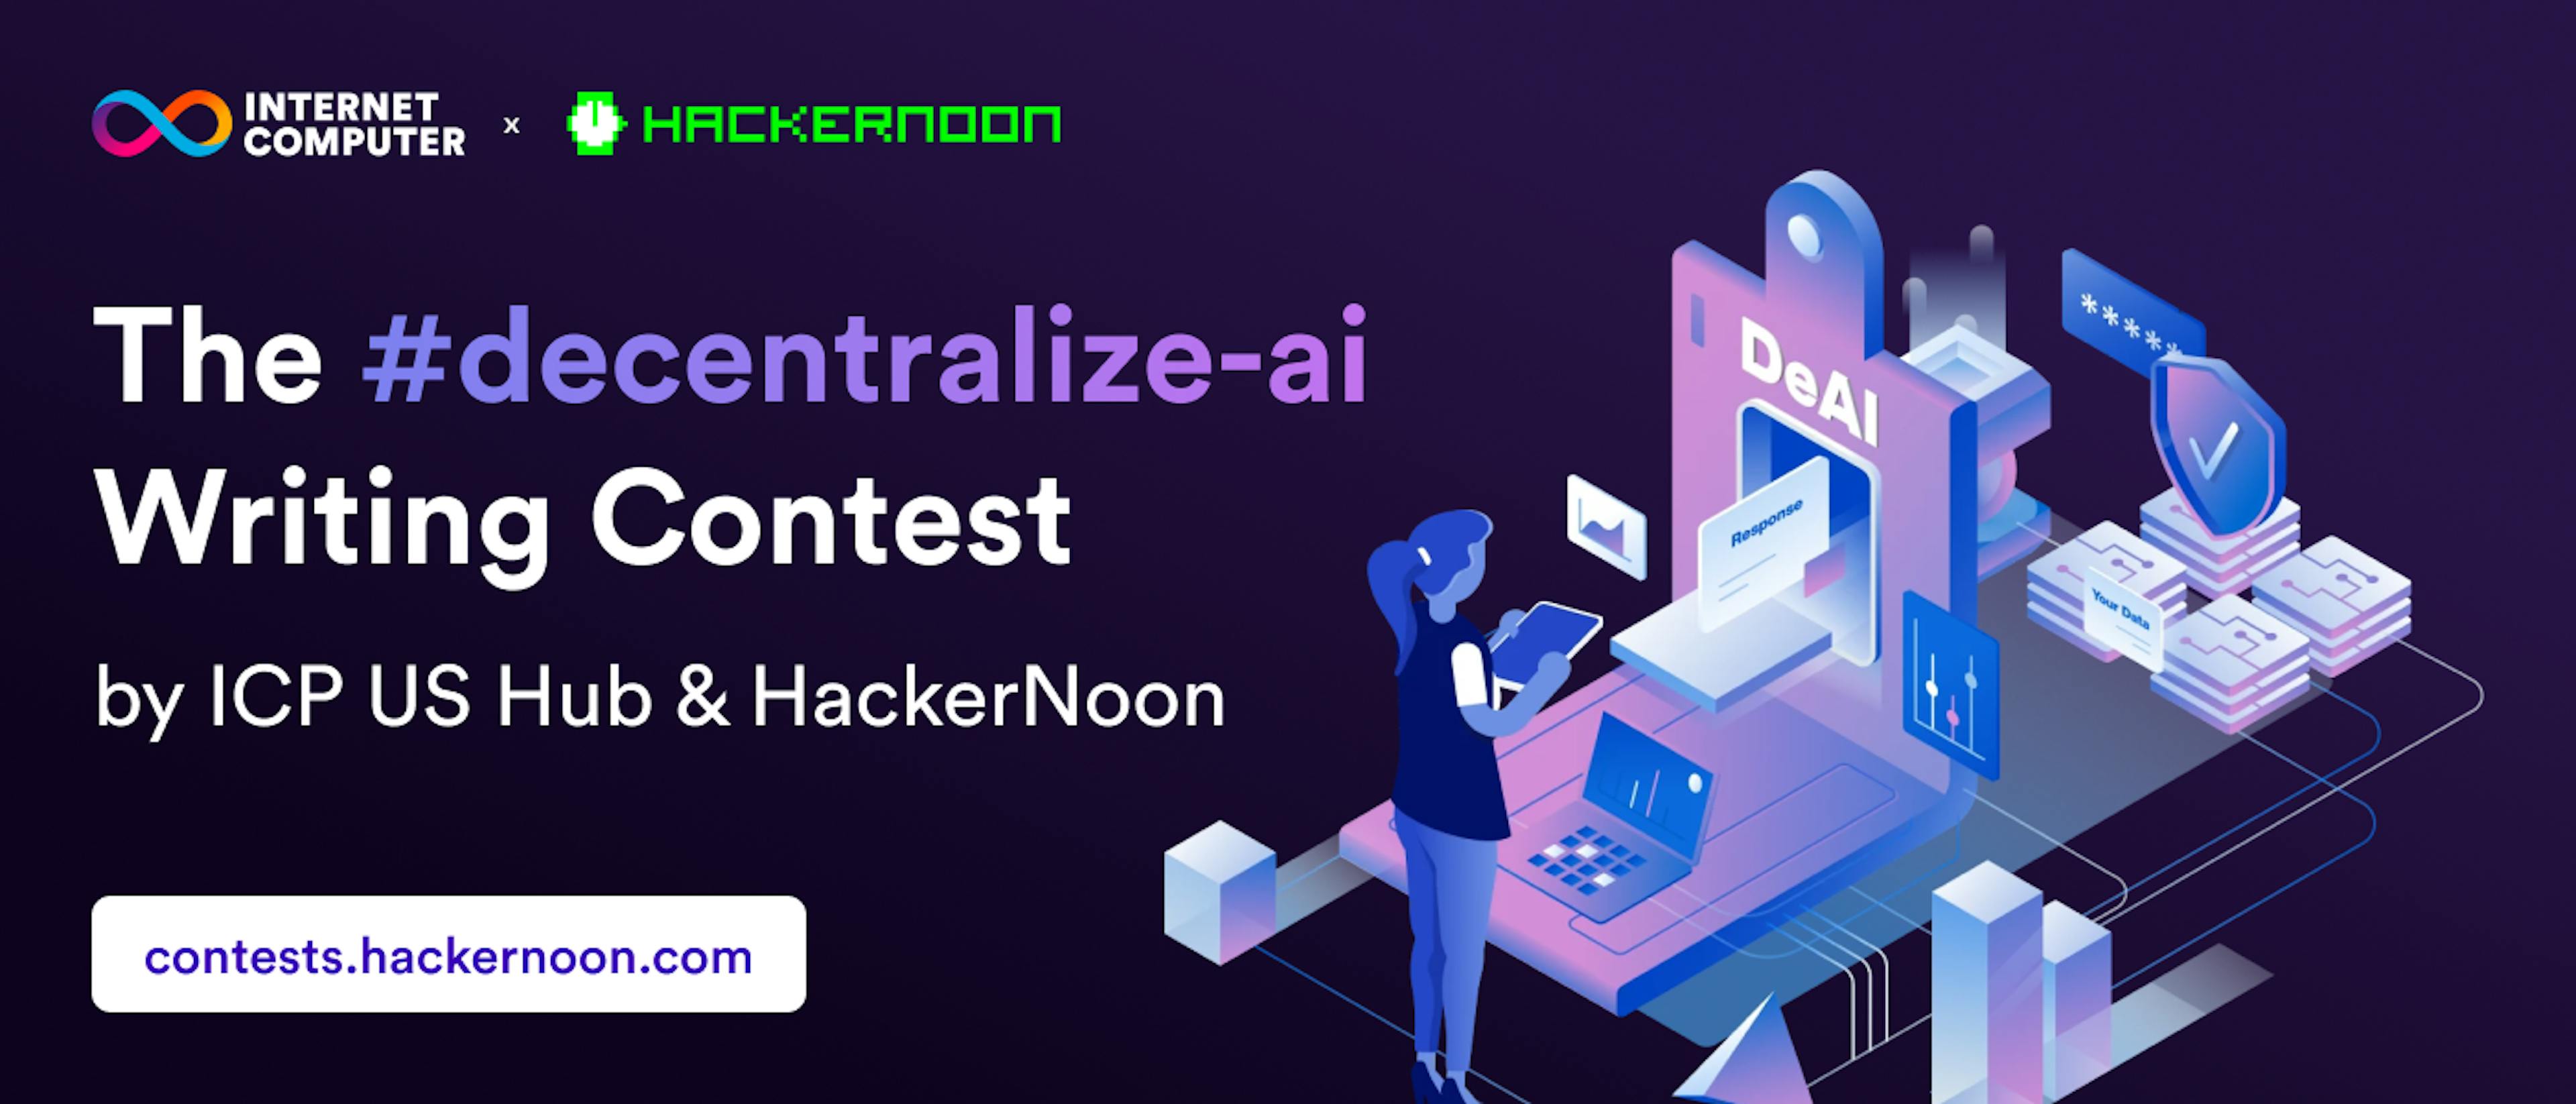 featured image - Win Big in the #decentralize-ai Writing Contest by ICP and HackerNoon 